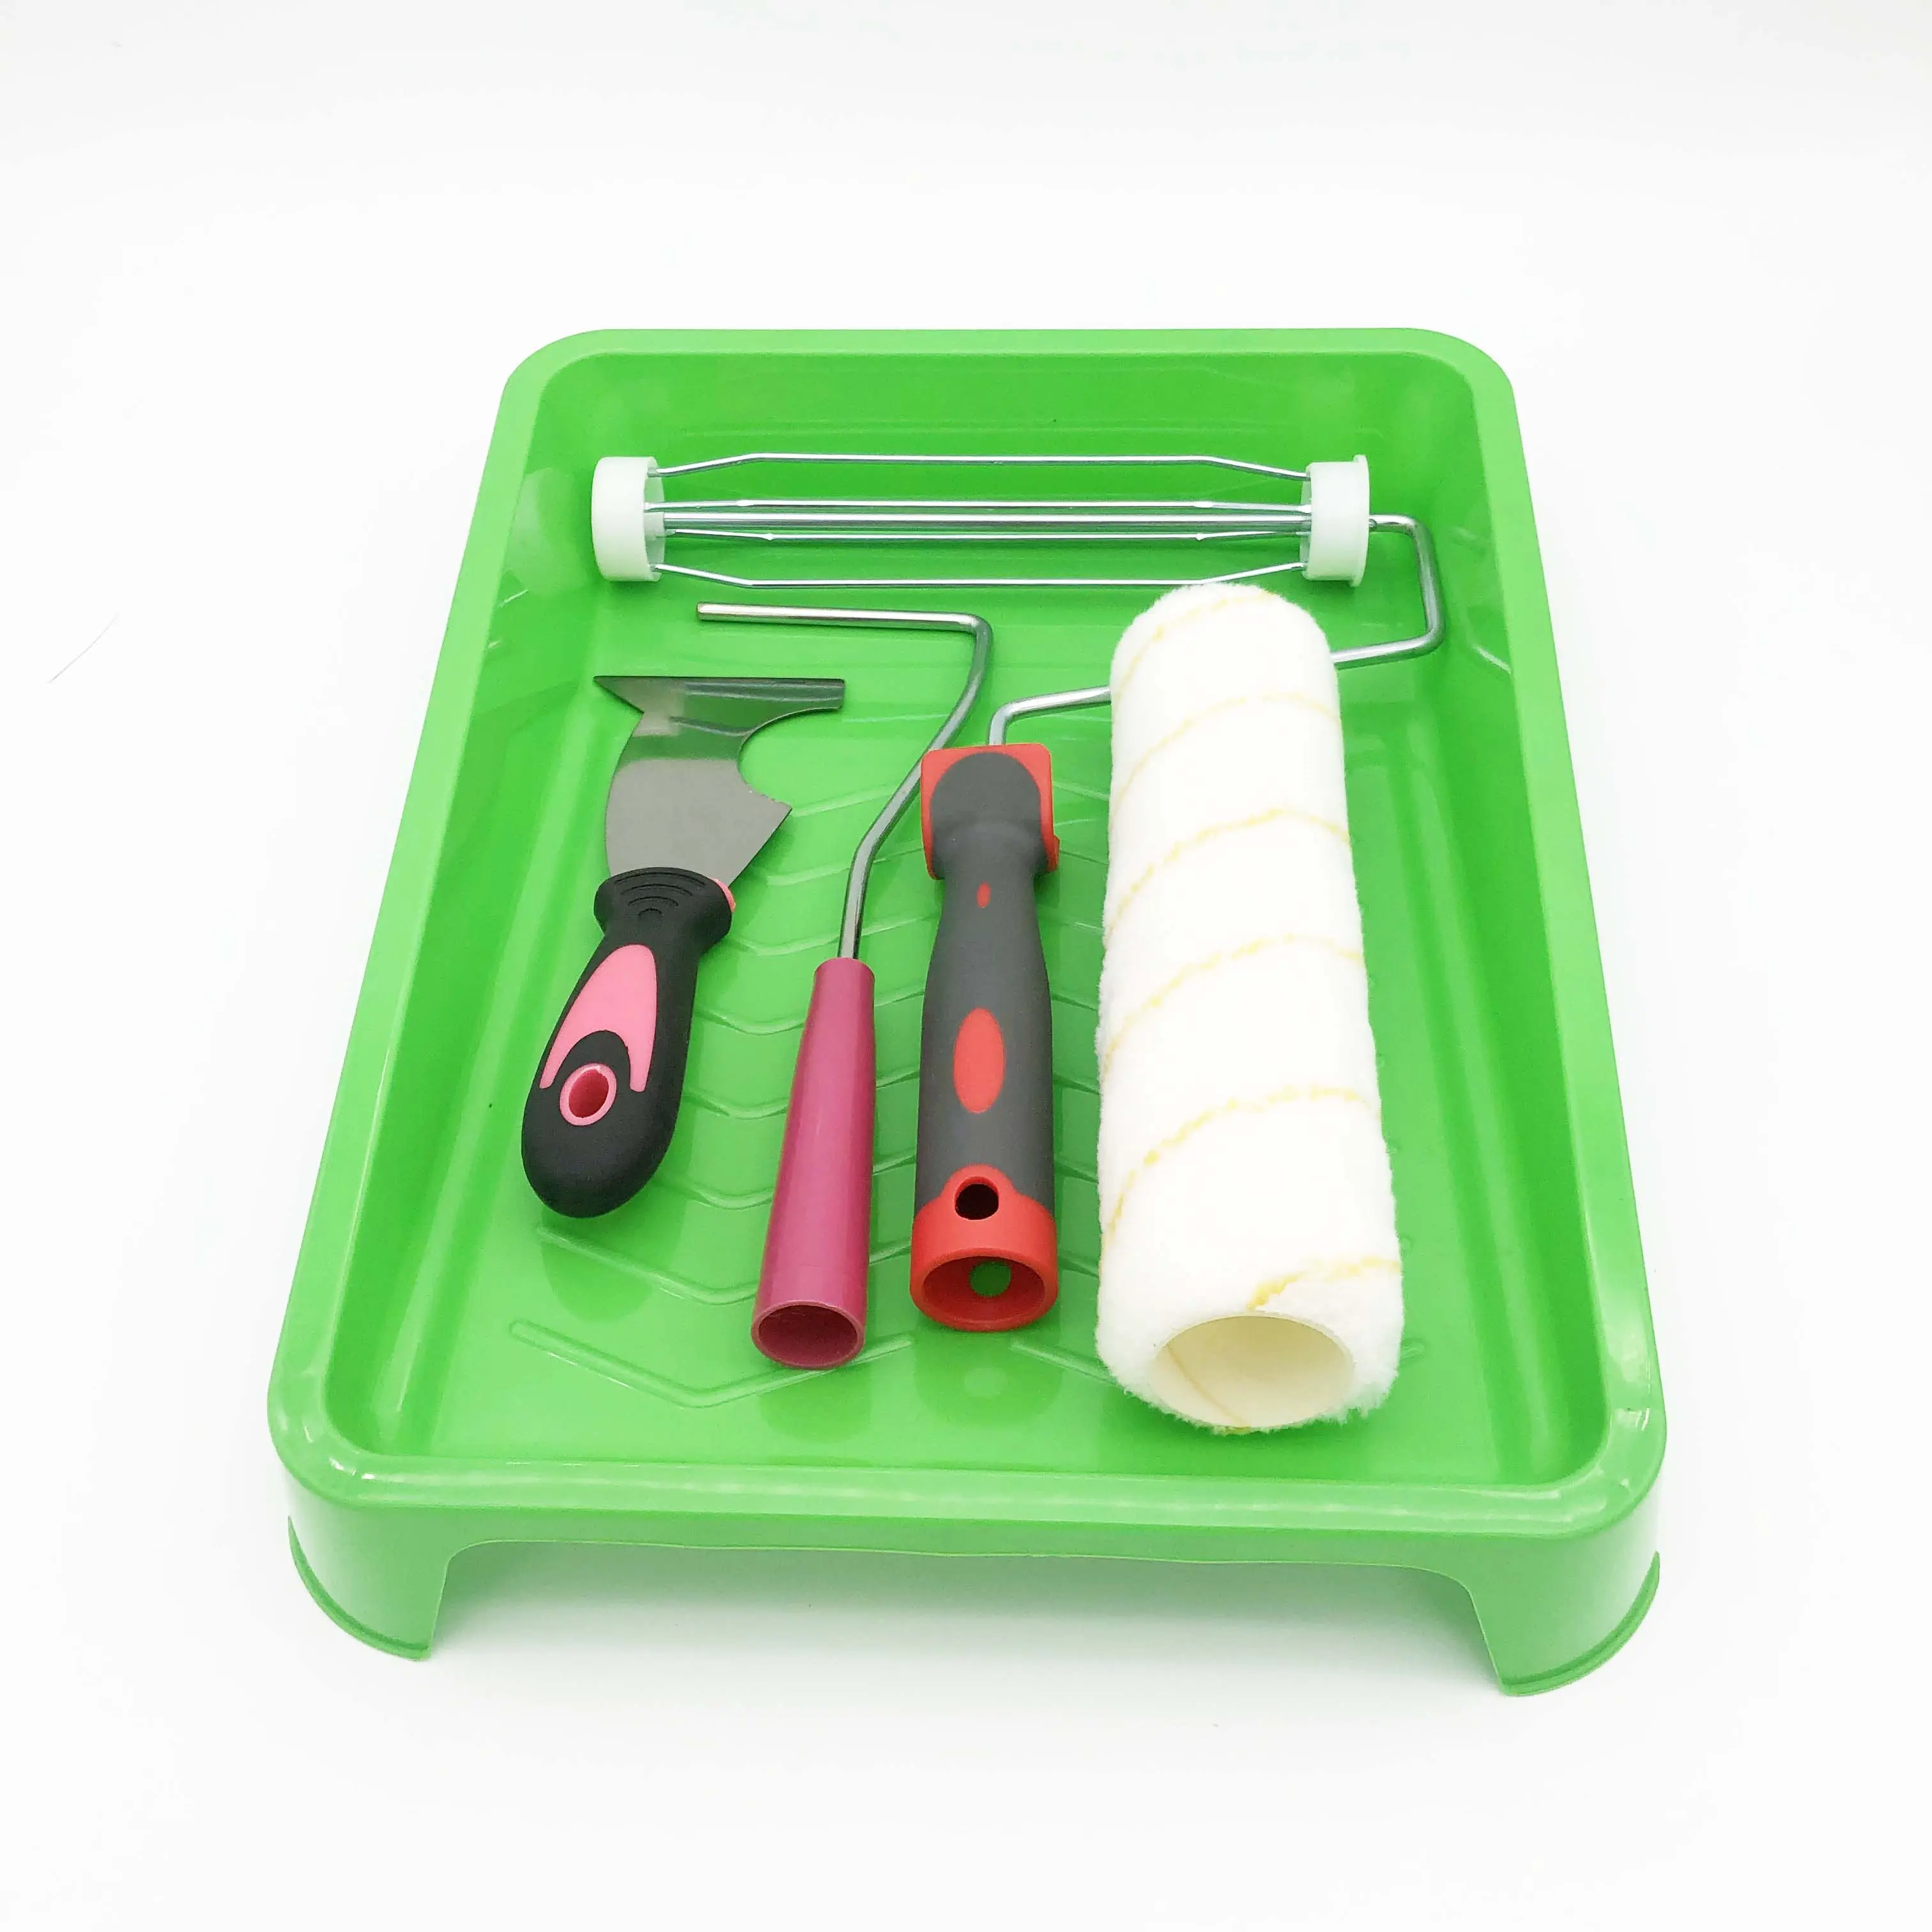 House Painting Tools Equipment Paint Brush And Roller Fabric Roller Brush Tray Painting Kit